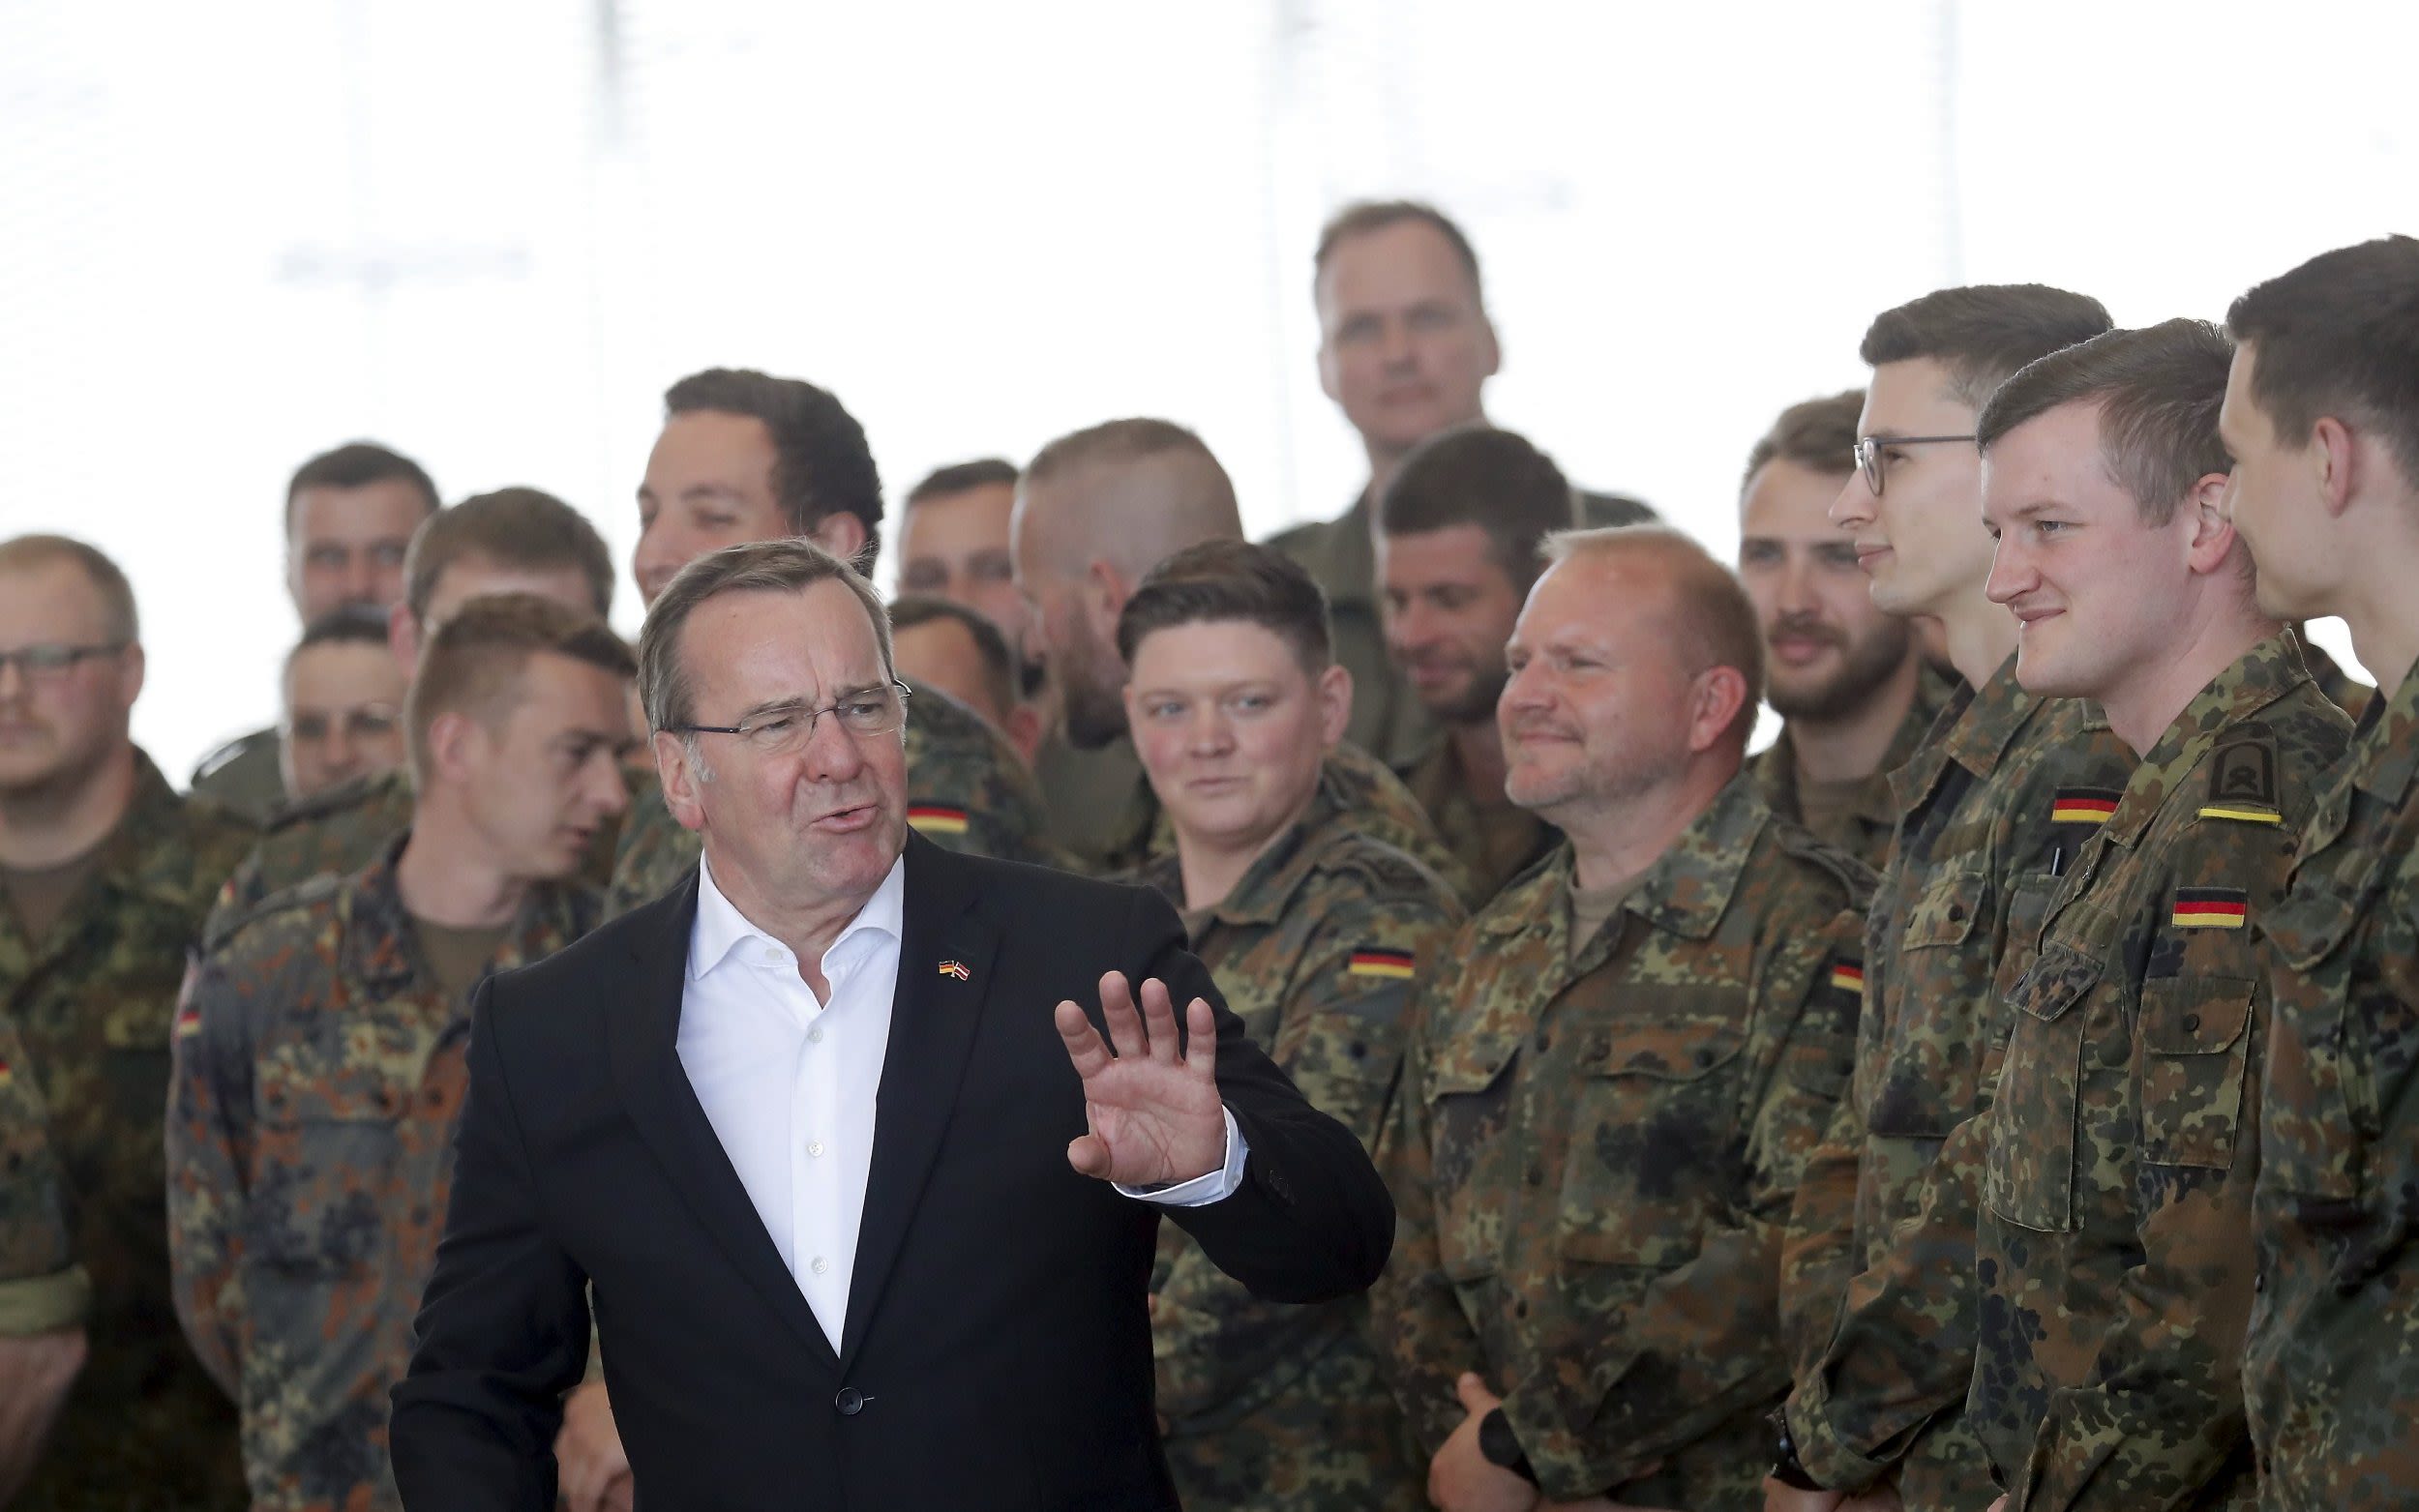 Germany ‘drops conscription’ for optional military service